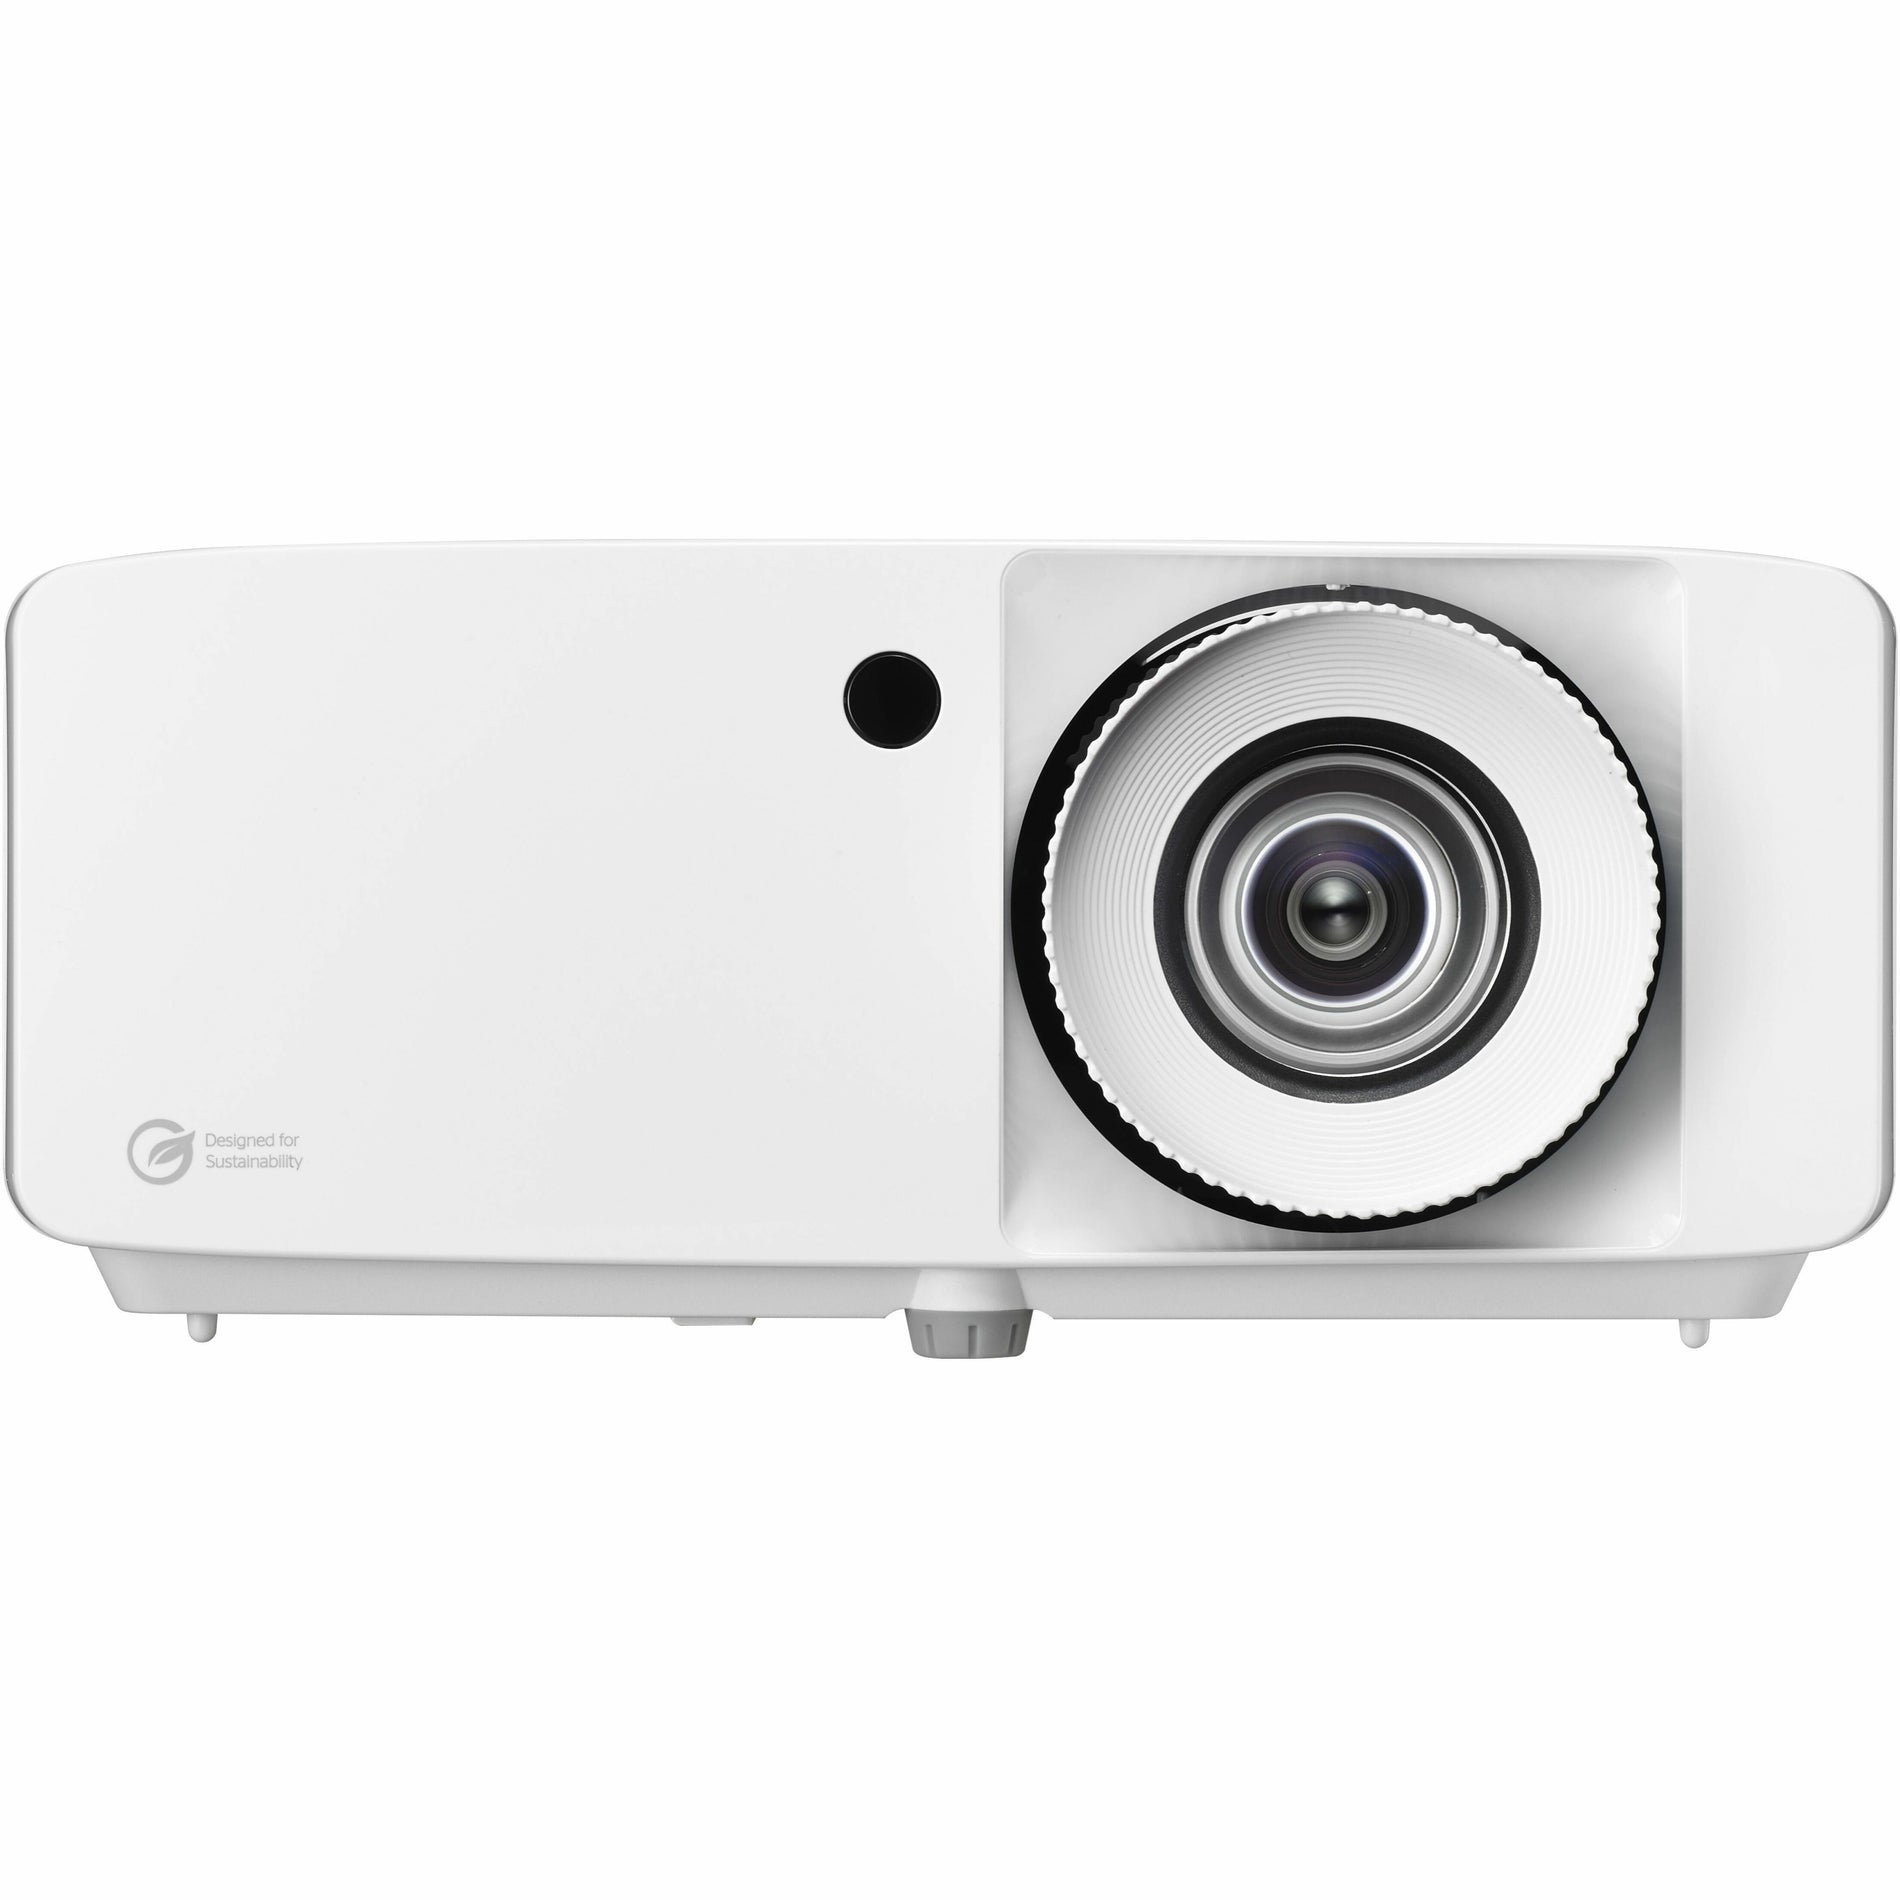 Optoma UHZ66 3D DLP Projector - 16:9 - White